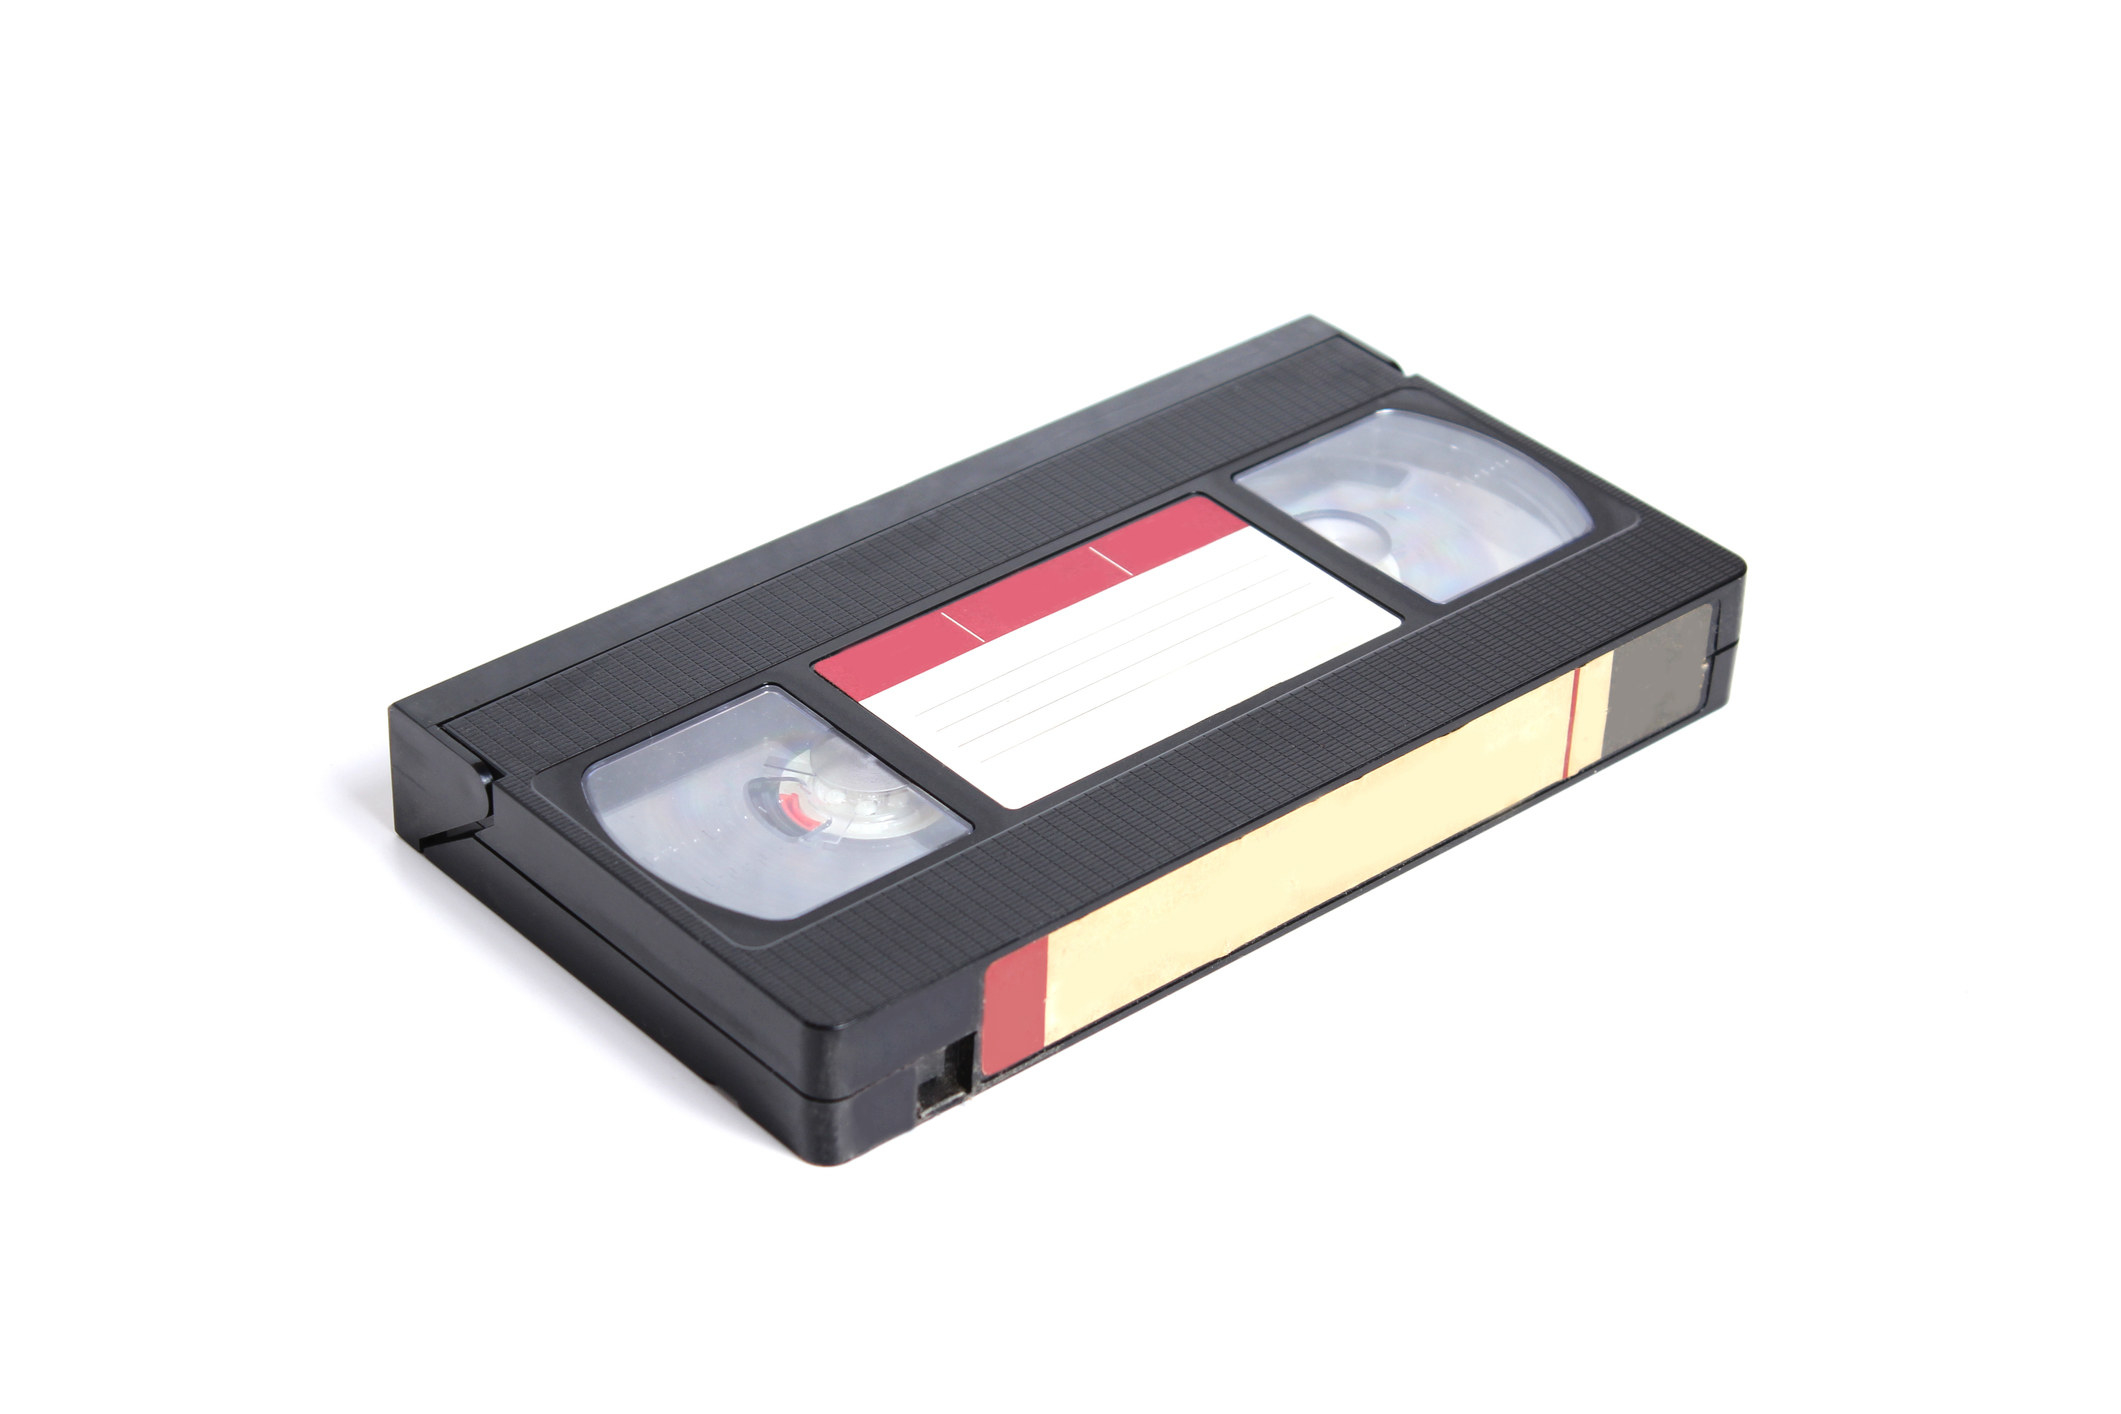 stock image of a VHS tape